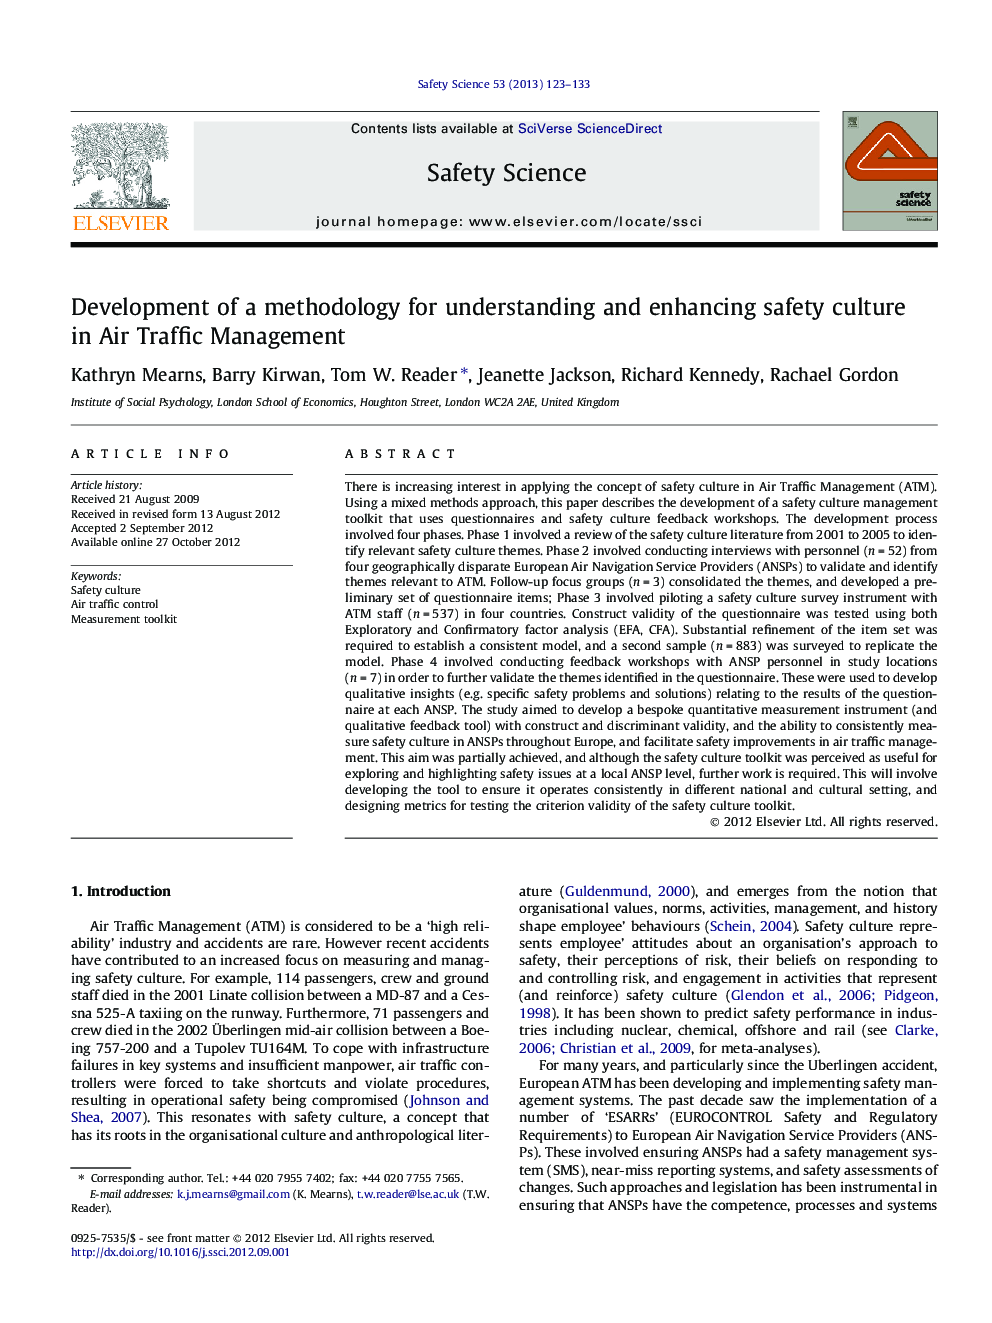 Development of a methodology for understanding and enhancing safety culture in Air Traffic Management